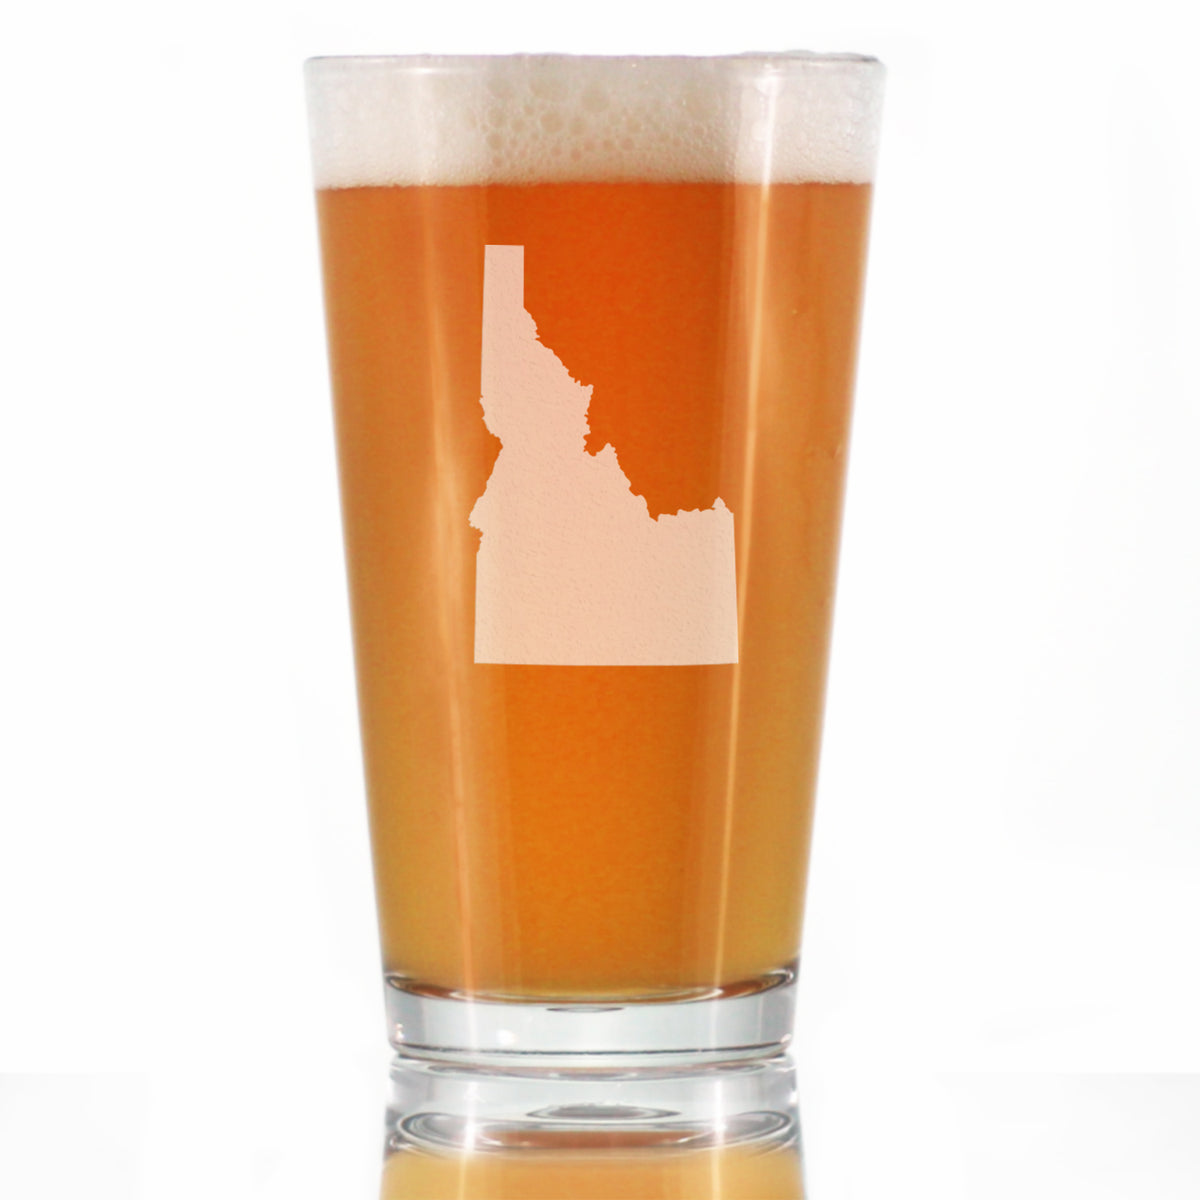 Idaho State Outline Pint Glass for Beer - State Themed Drinking Decor and Gifts for Idahoan Women &amp; Men - 16 Oz Glasses